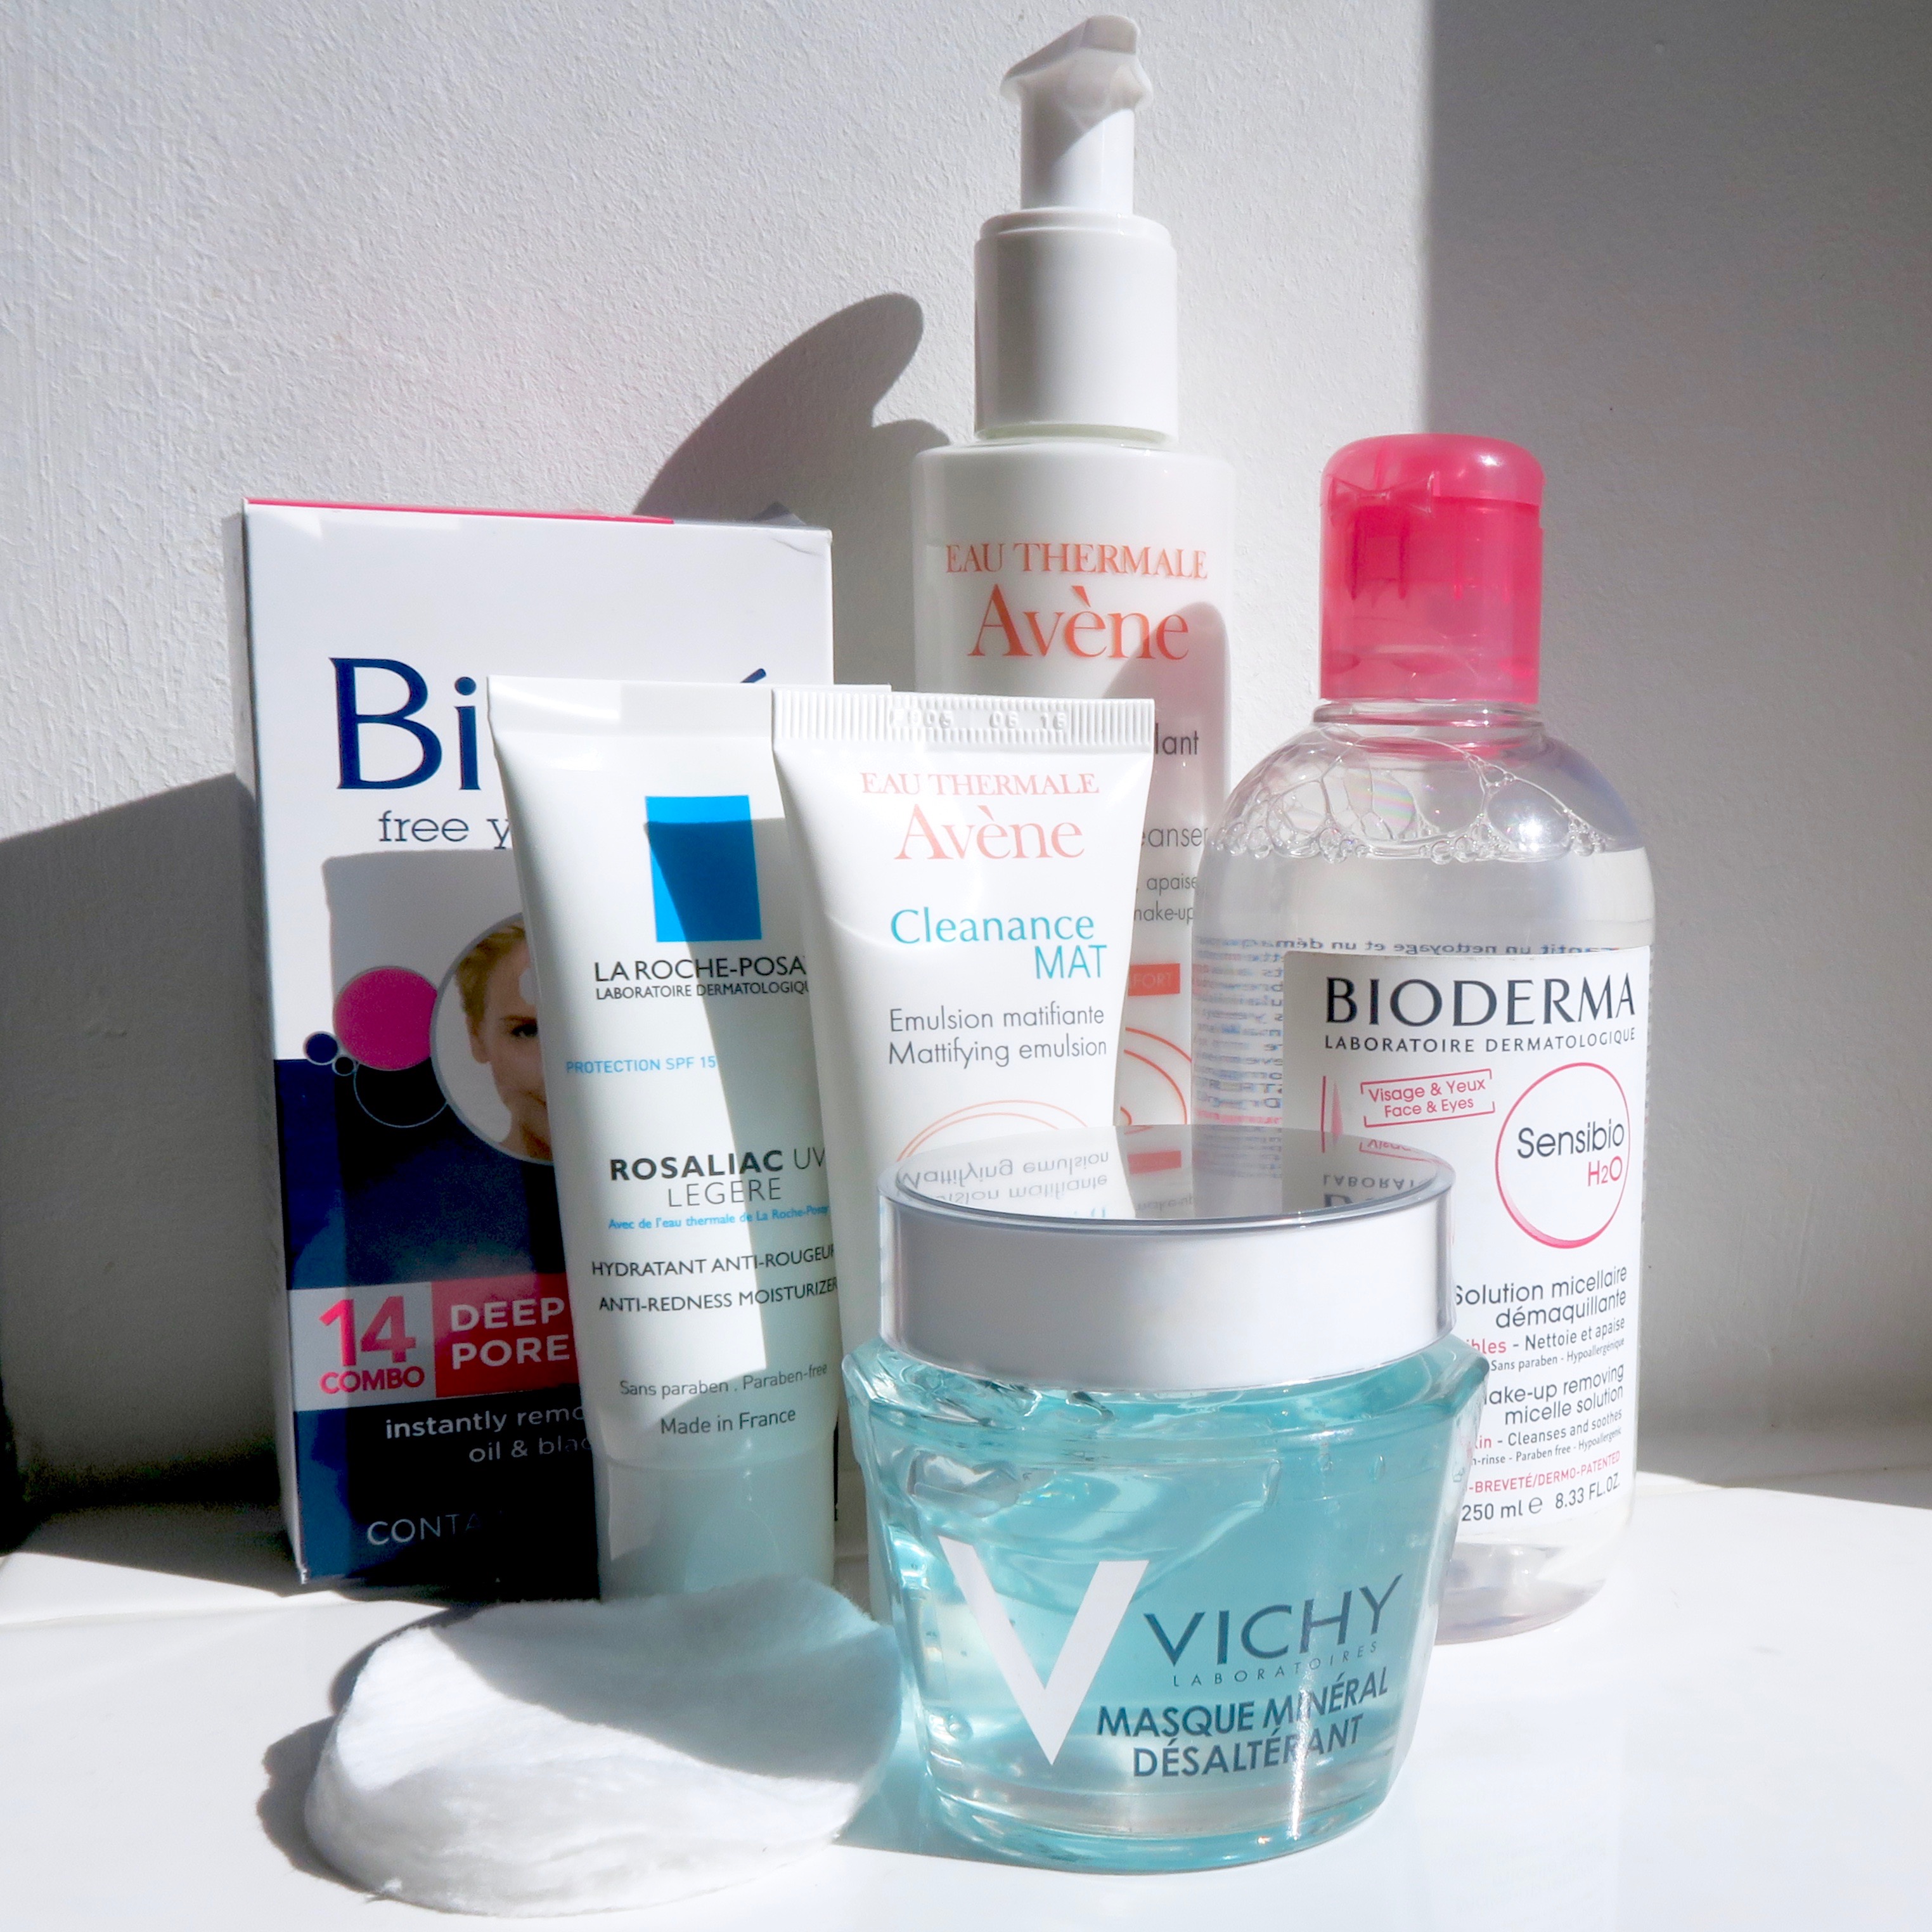 Moisturisers for rosacea and sensitive skin: I've been finding skincare favourites with Boots